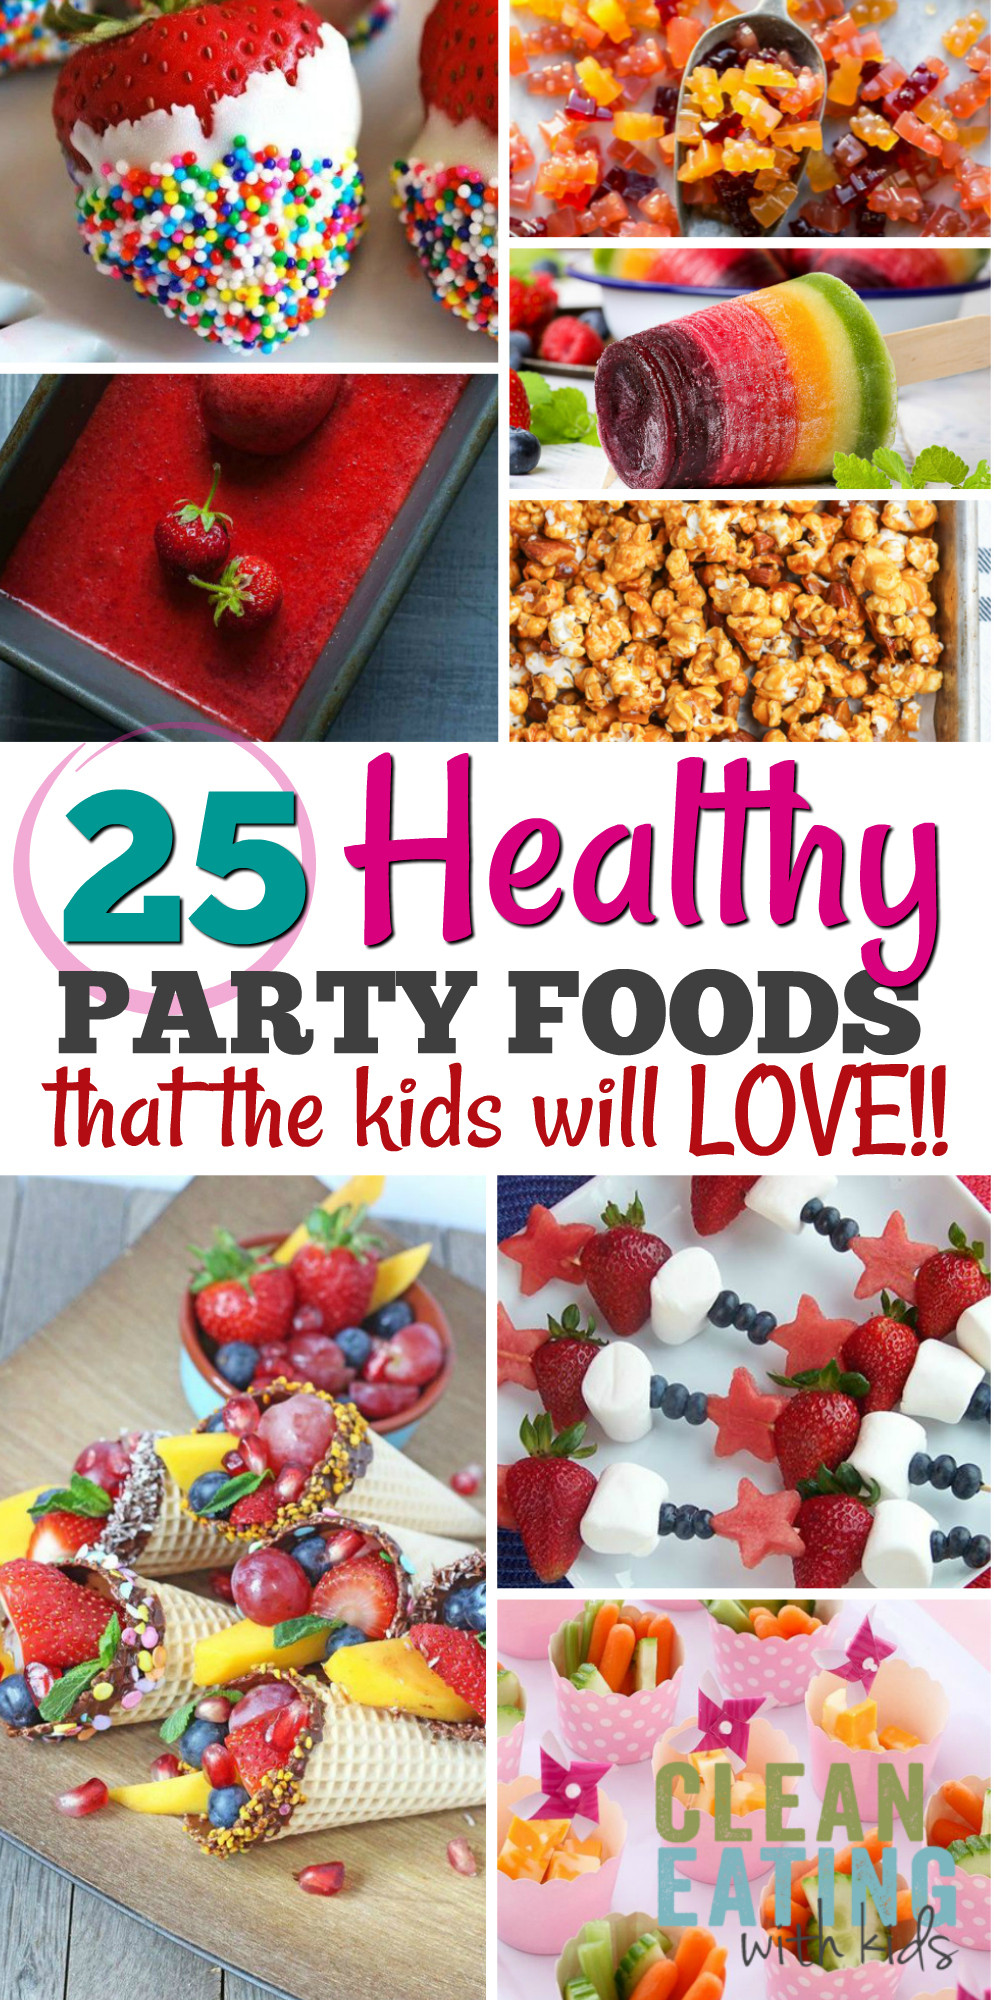 Kids Birthday Party Snack Ideas
 25 Healthy Birthday Party Food Ideas Clean Eating with kids